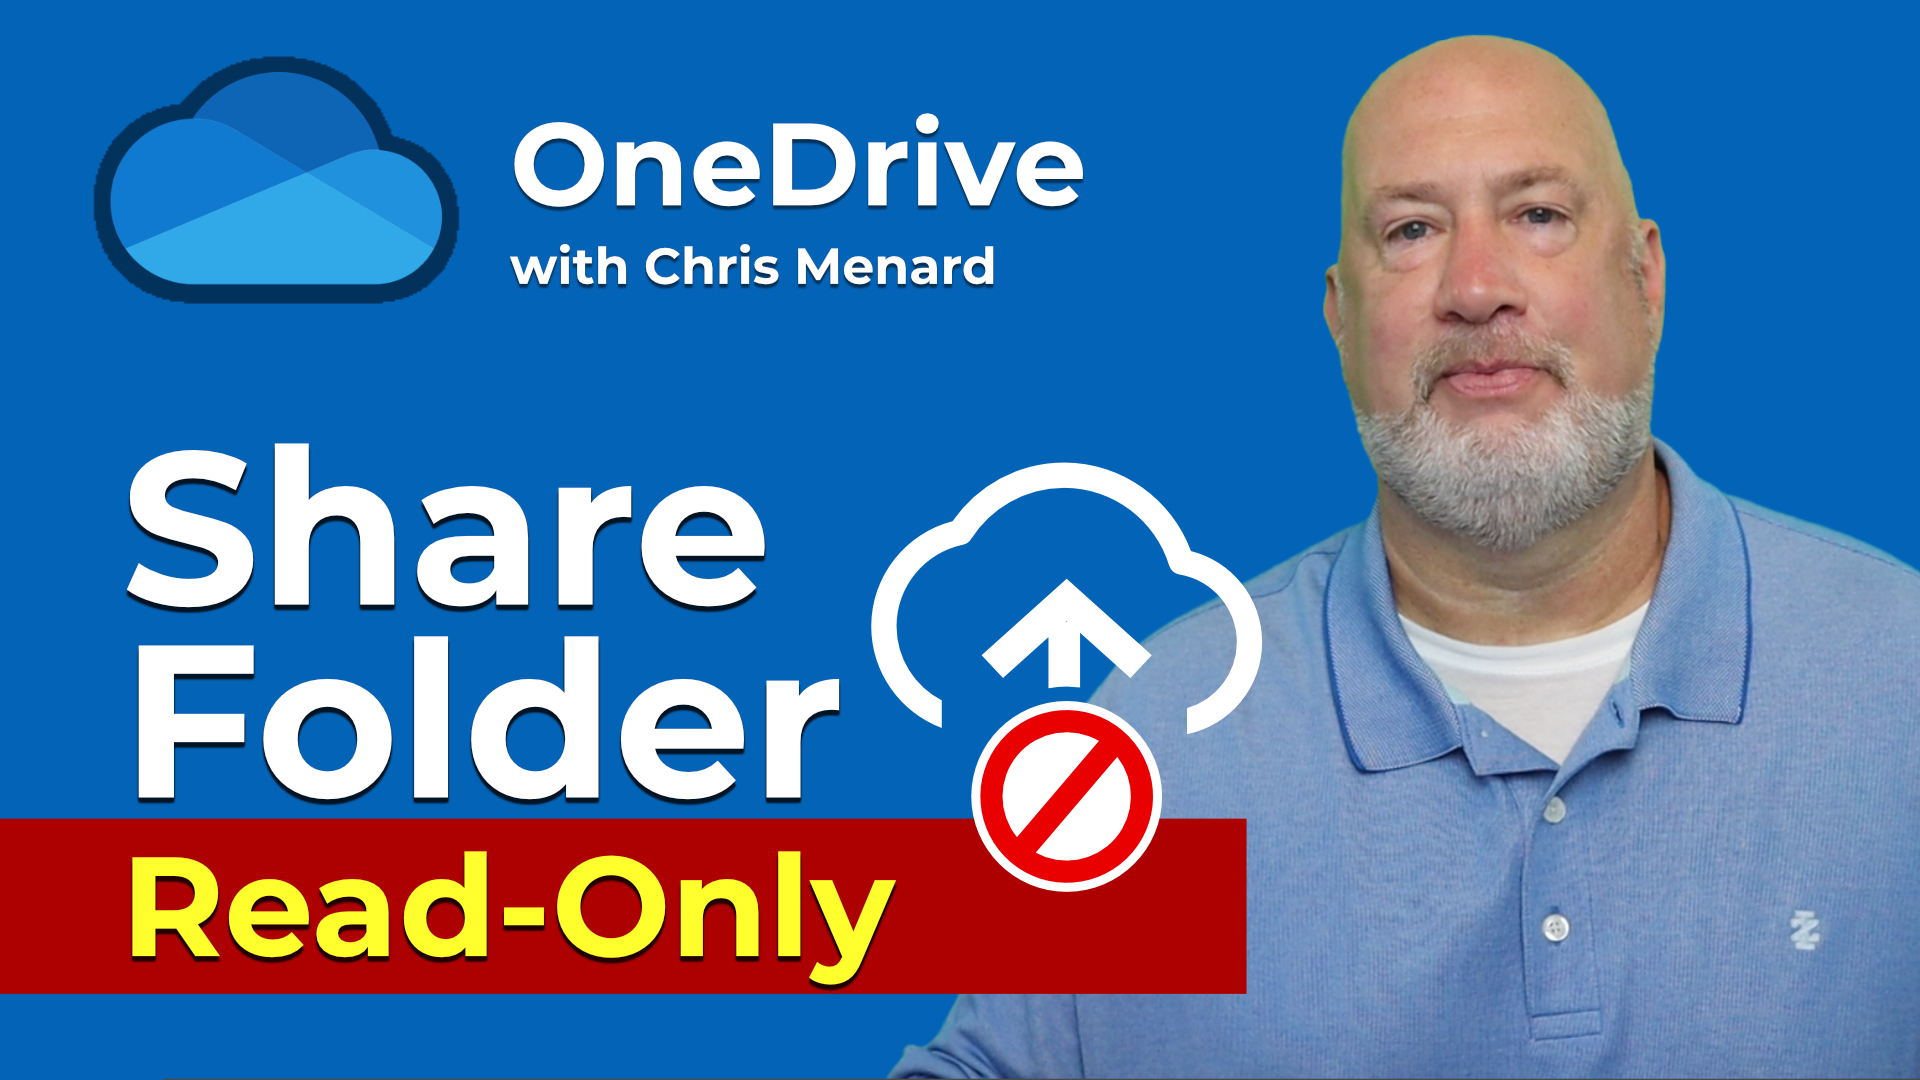 OneDrive - Share a Folder as Read Only | Set Expiration Date and Password